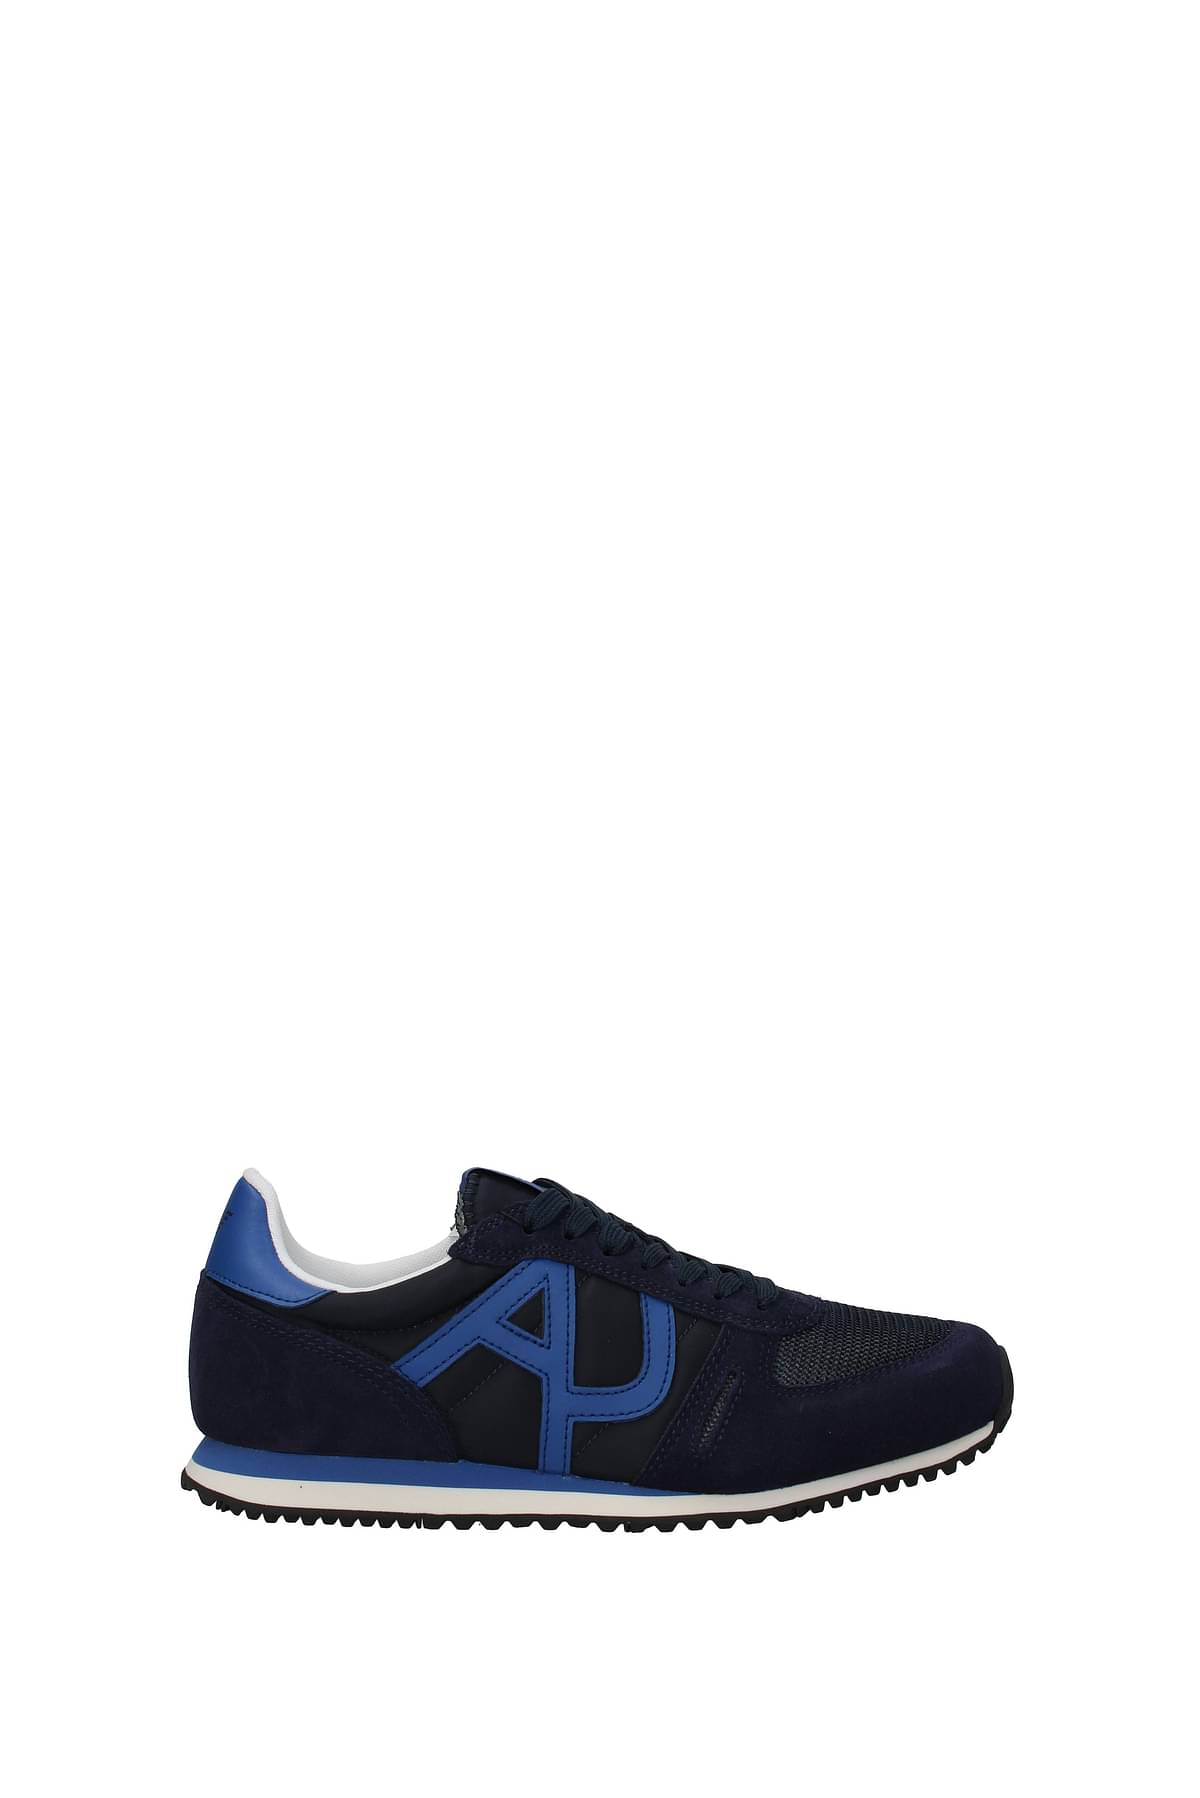 Armani Jeans Sneakers 19350277P42036435 Fabric 69,38€